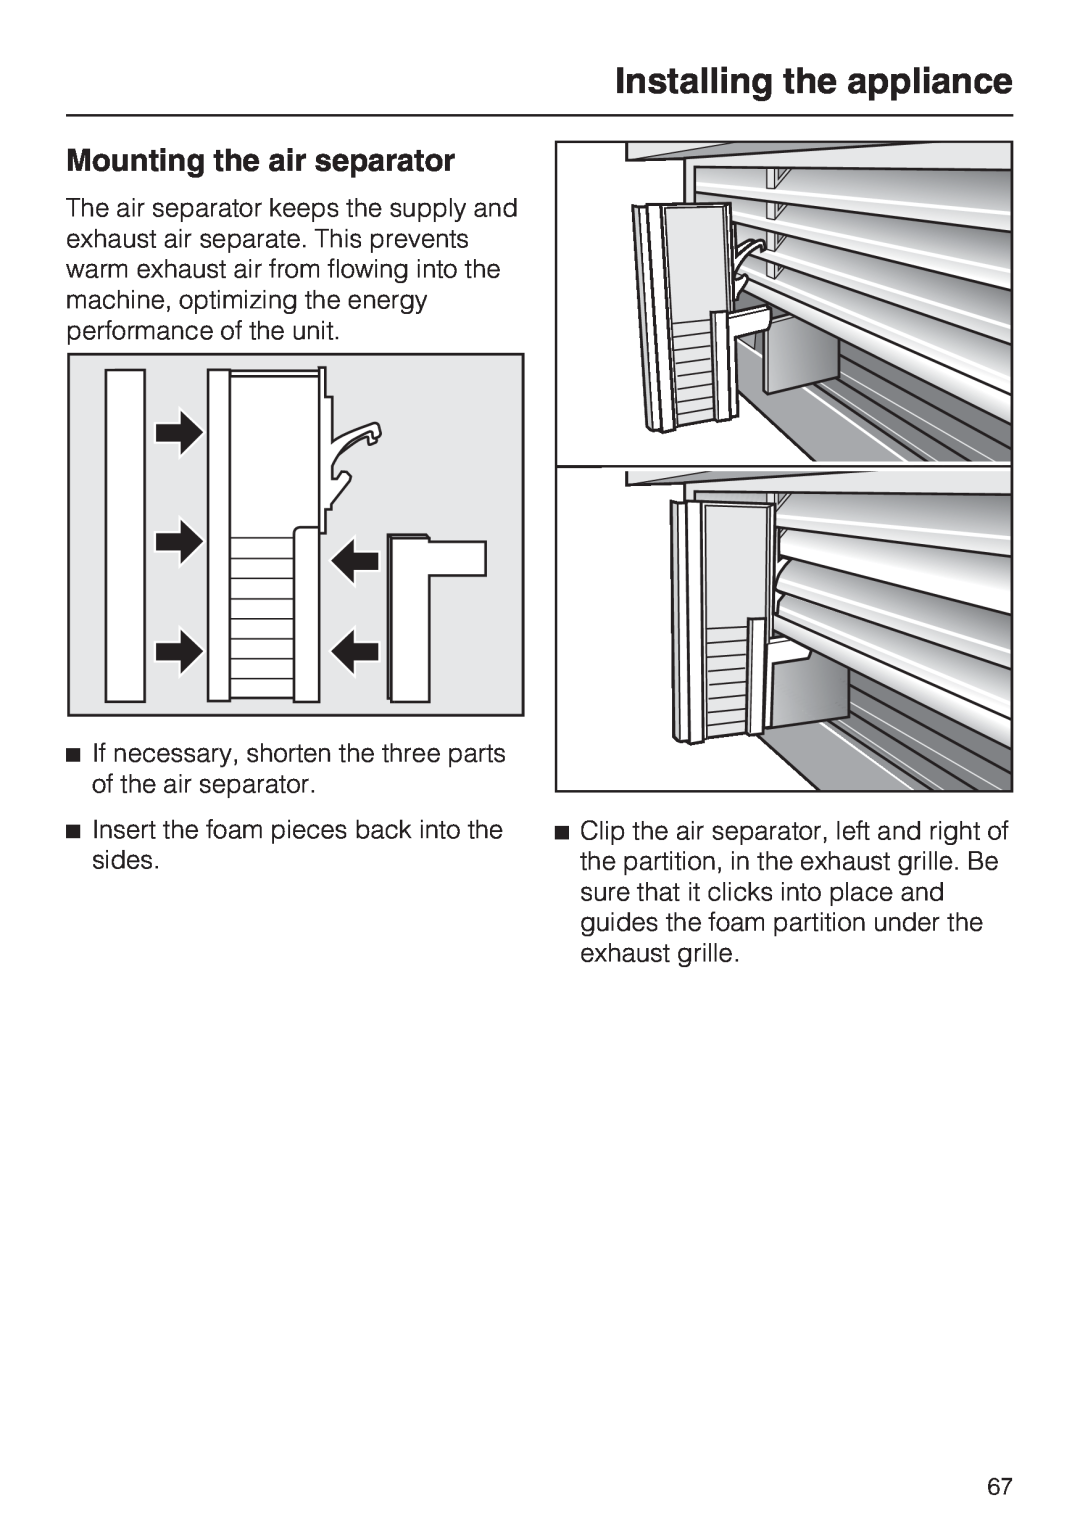 Miele KF1911SF, KF1811SF, KF1901SF, KF1801SF installation instructions Mounting the air separator, Installing the appliance 